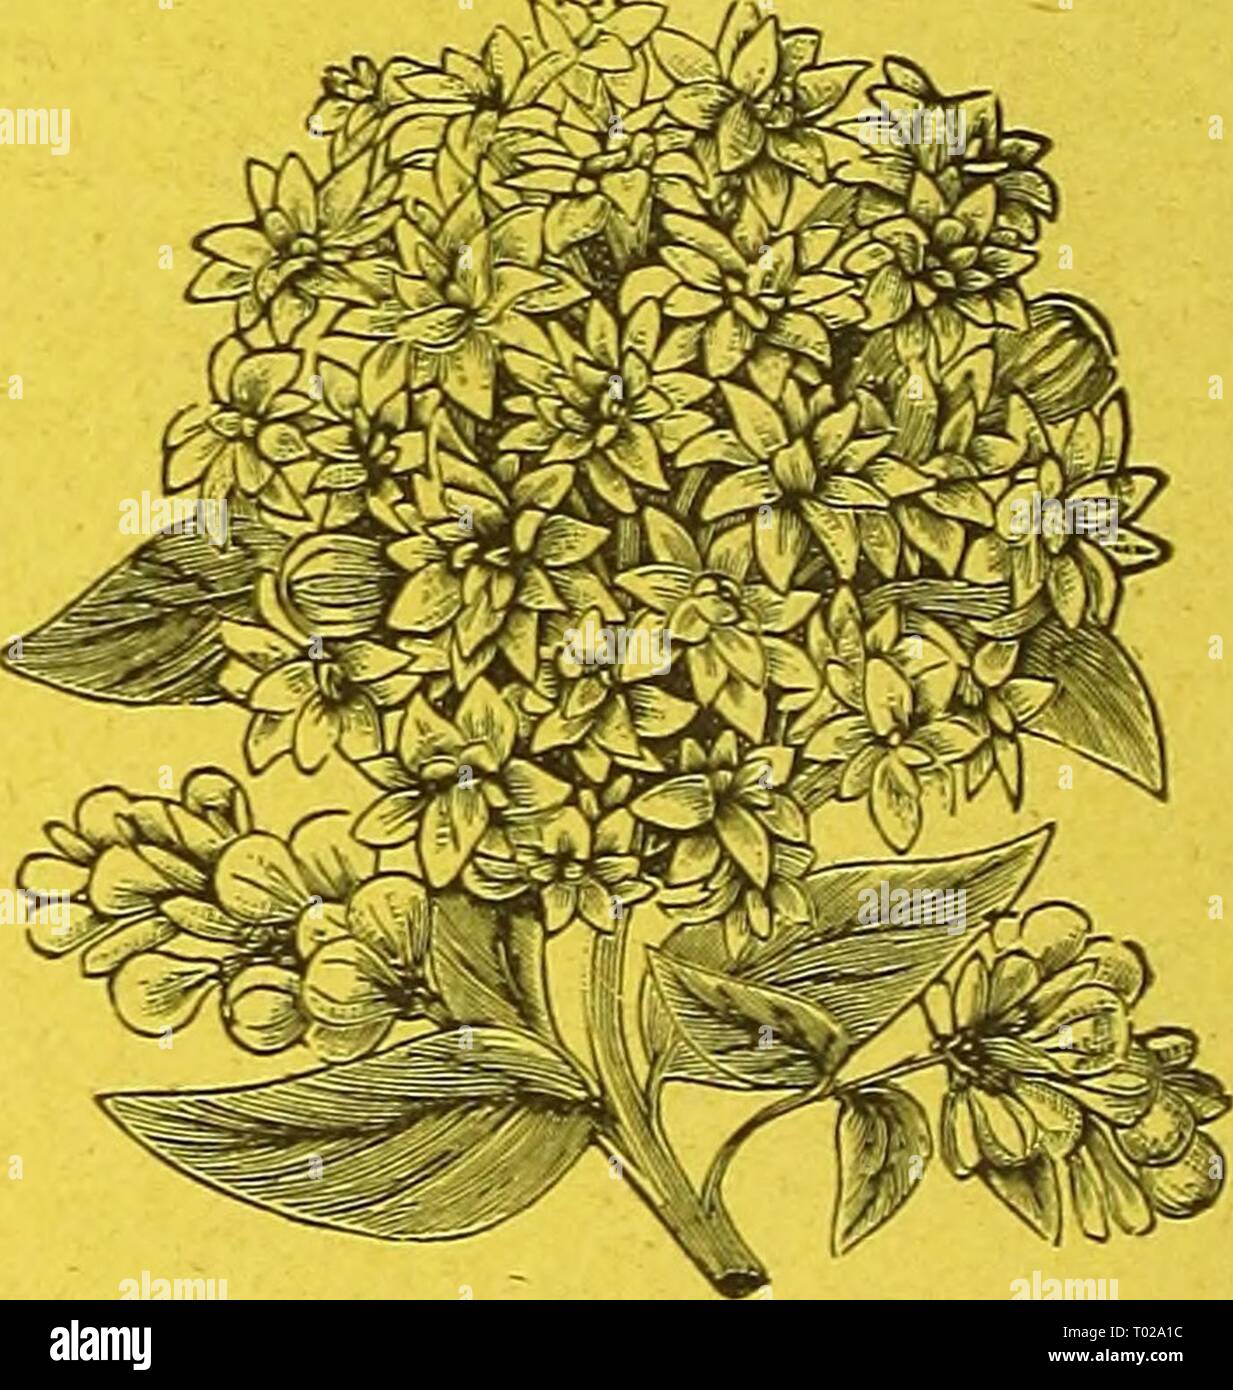 Dreer's garden calendar for 1887 . dreersgardencale1887henr Year: 1887  ABUTILON, GOLDEN FLEECE. A bright golden-yellow Abutilon of strong vigor- ous habit and very free flowering. There have been a number of yellow Abutilons introduced during the past few years but they all lacked richness of color; the variety now offered combines large size, fine form and depth of coloring, and -will become the leading yellow variety. 25 cis. each, $2.50 per dozen.    Bouvardia Victor Lemoine. A new double scarlet variety, an improvement on Thomas Meehan, as it is of a brighter color, freer habit, and more  Stock Photo